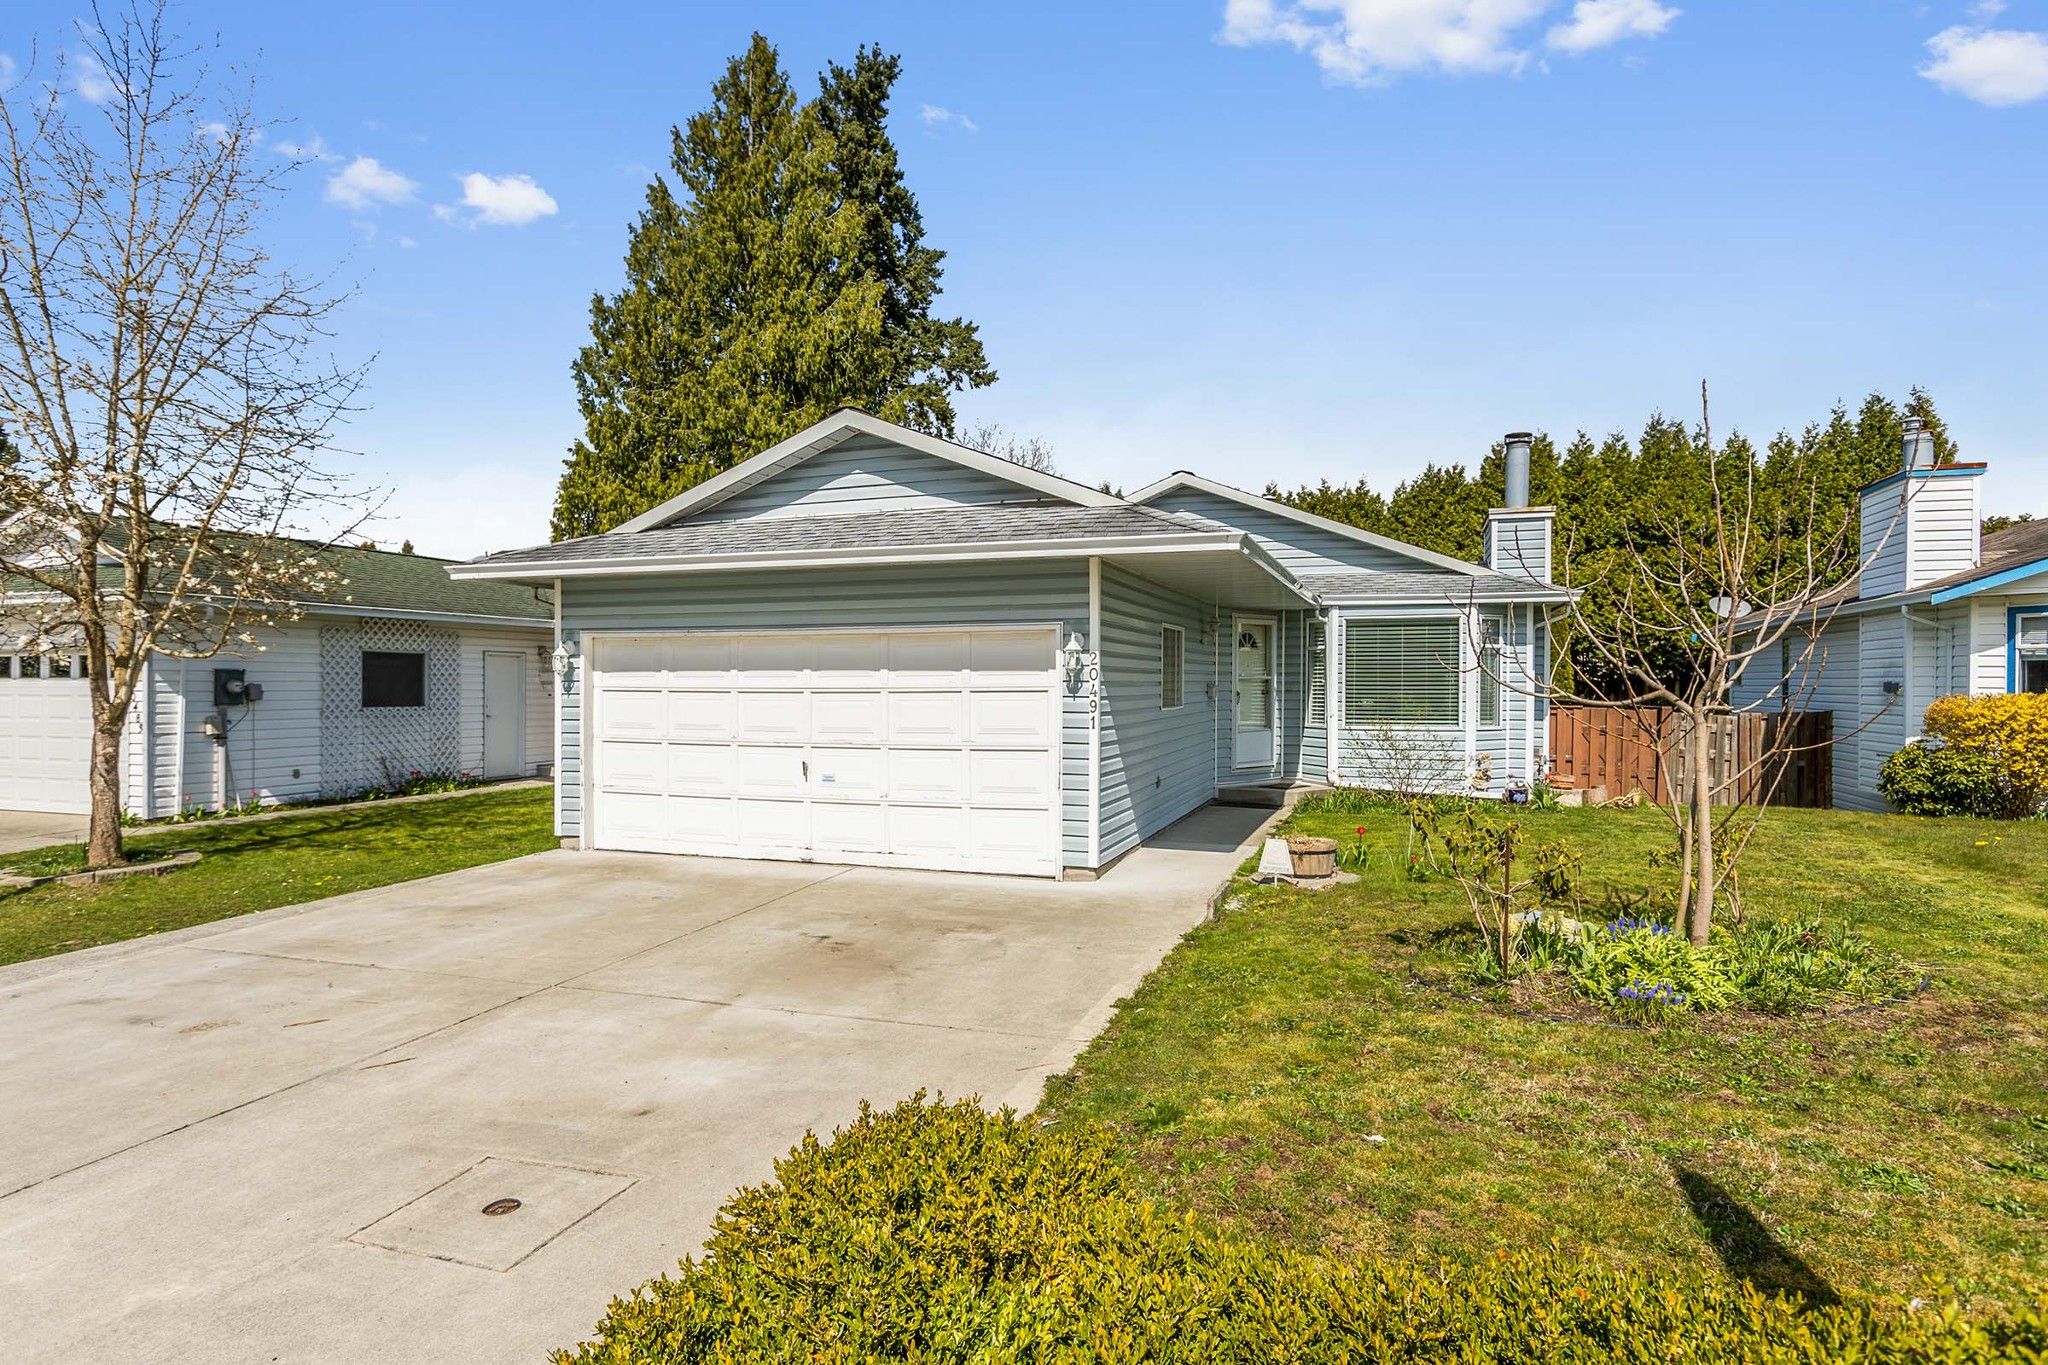 I have sold a property at 20491 118 AVE in Maple Ridge